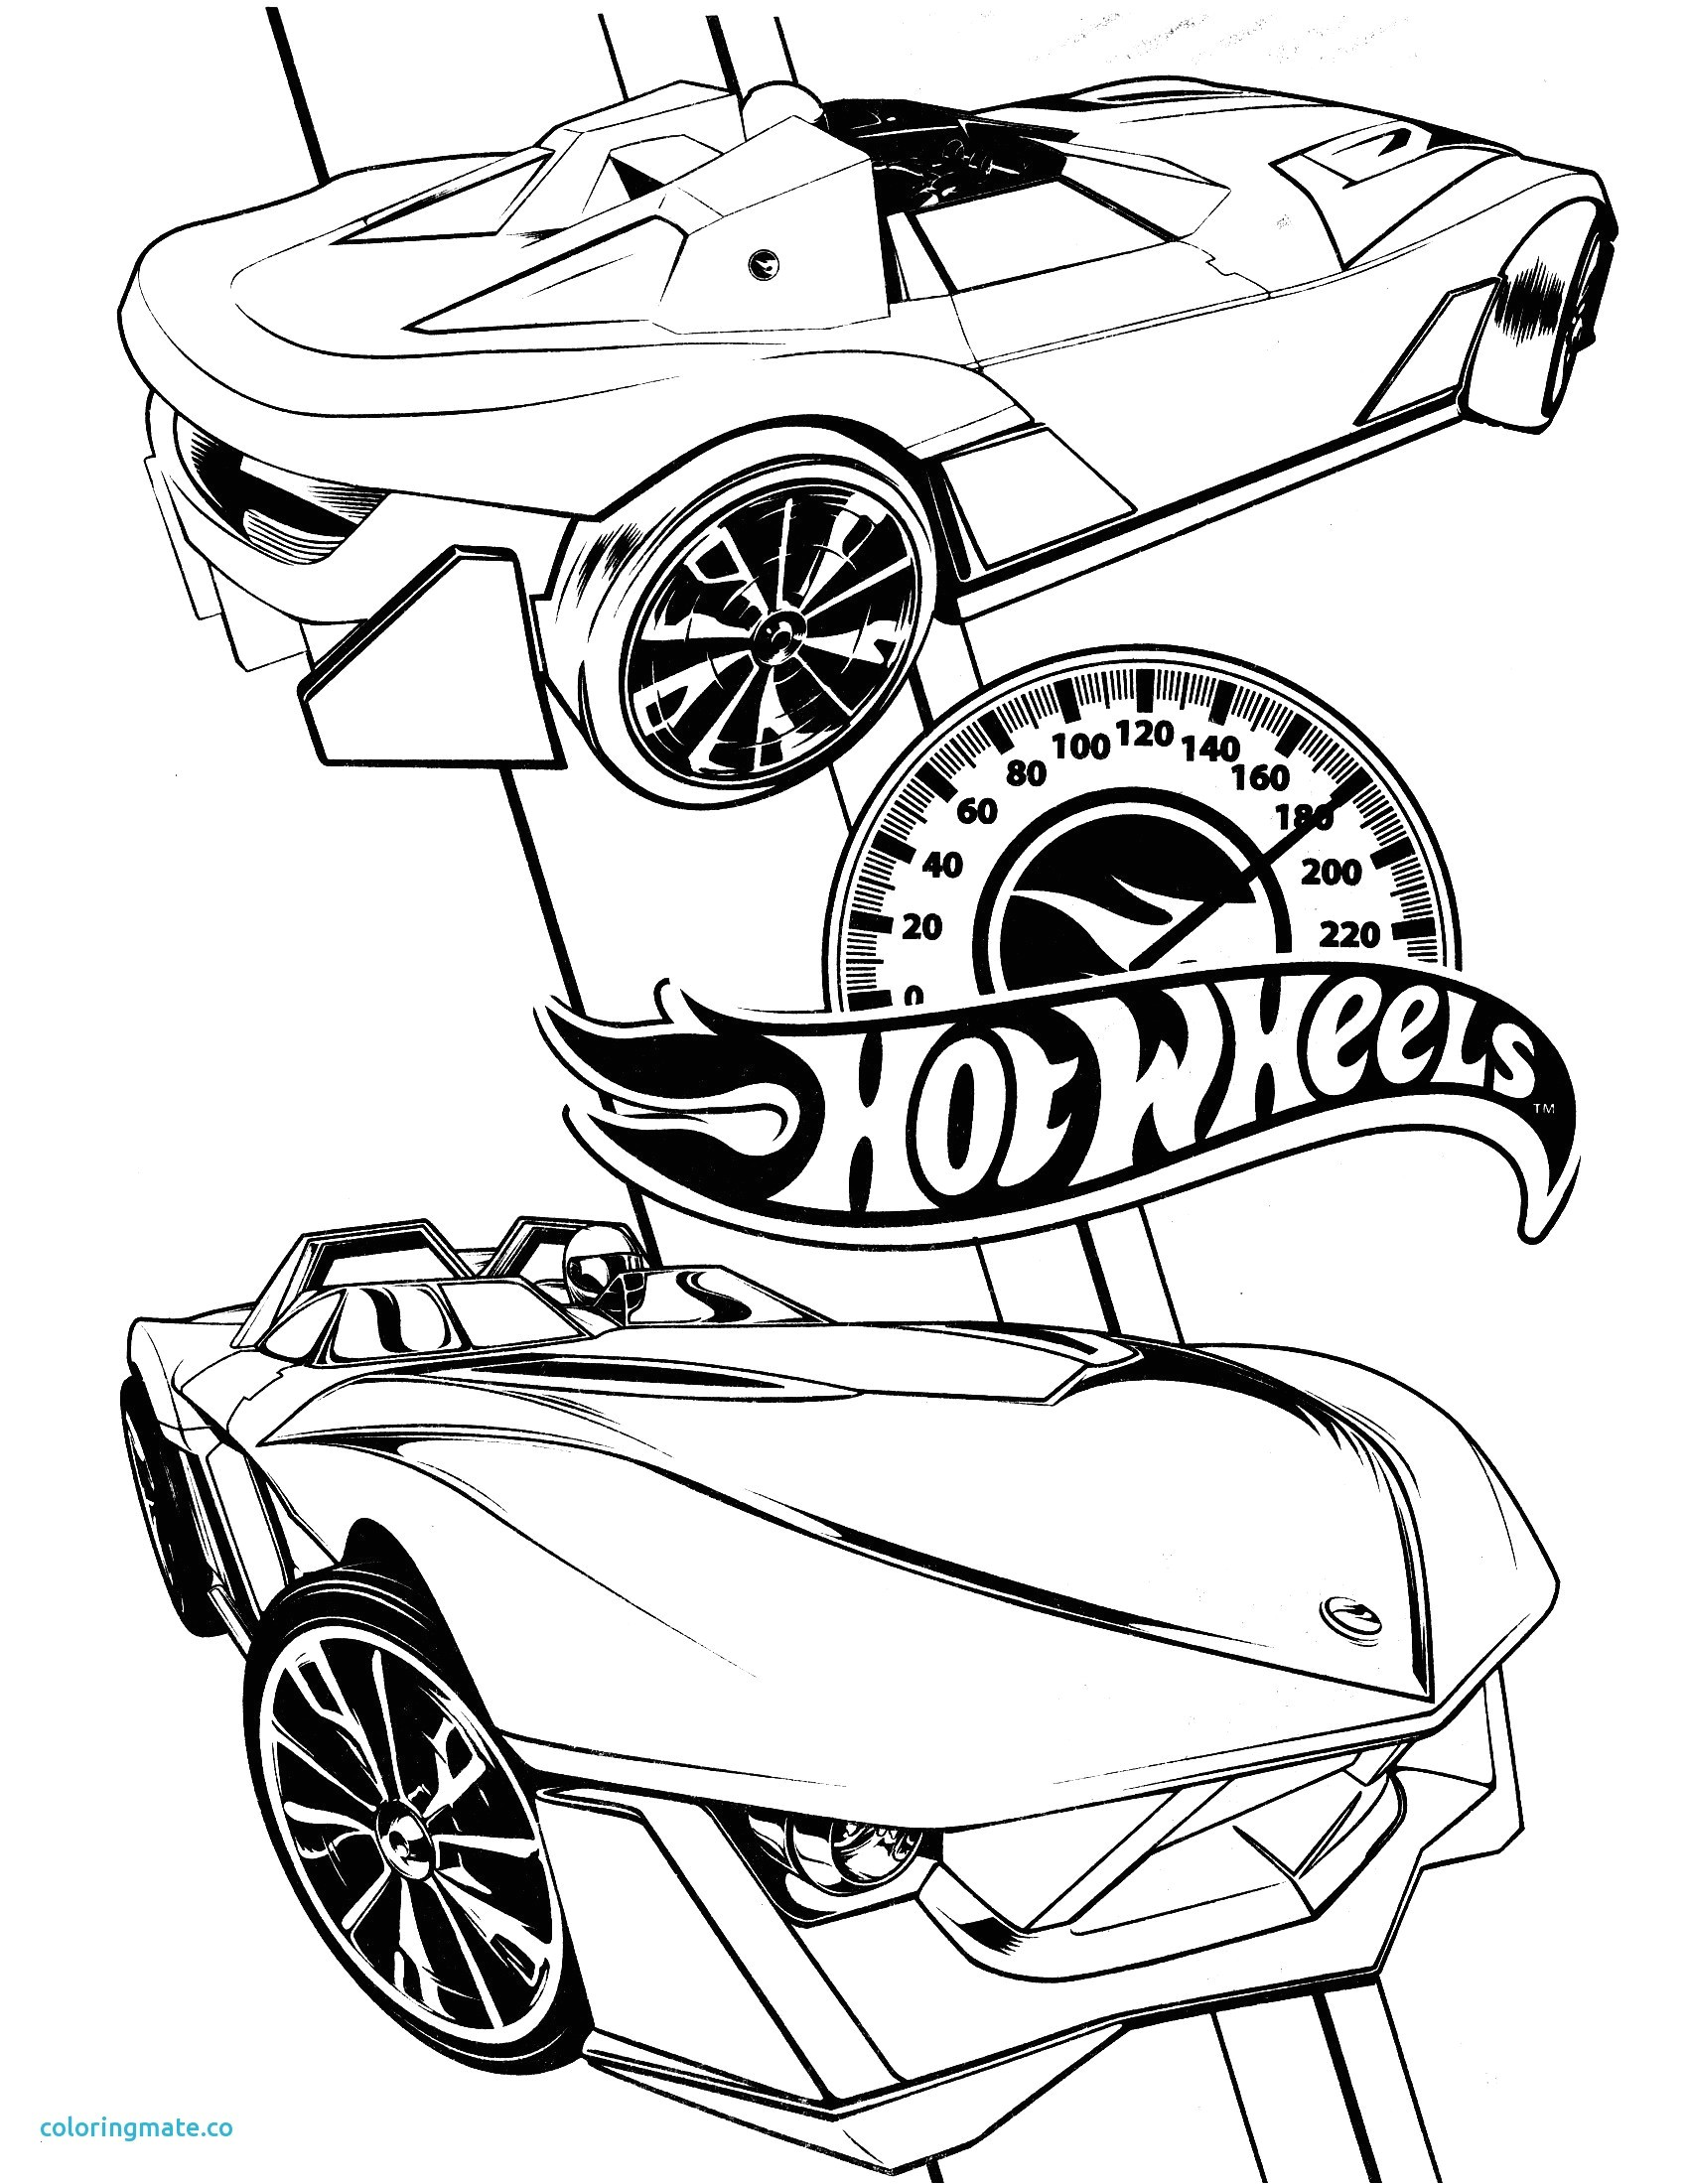 Hot Wheels Coloring Pages Wonderful Cool Hot Wheels Coloring Pages Elegant Inspiration Coloriage